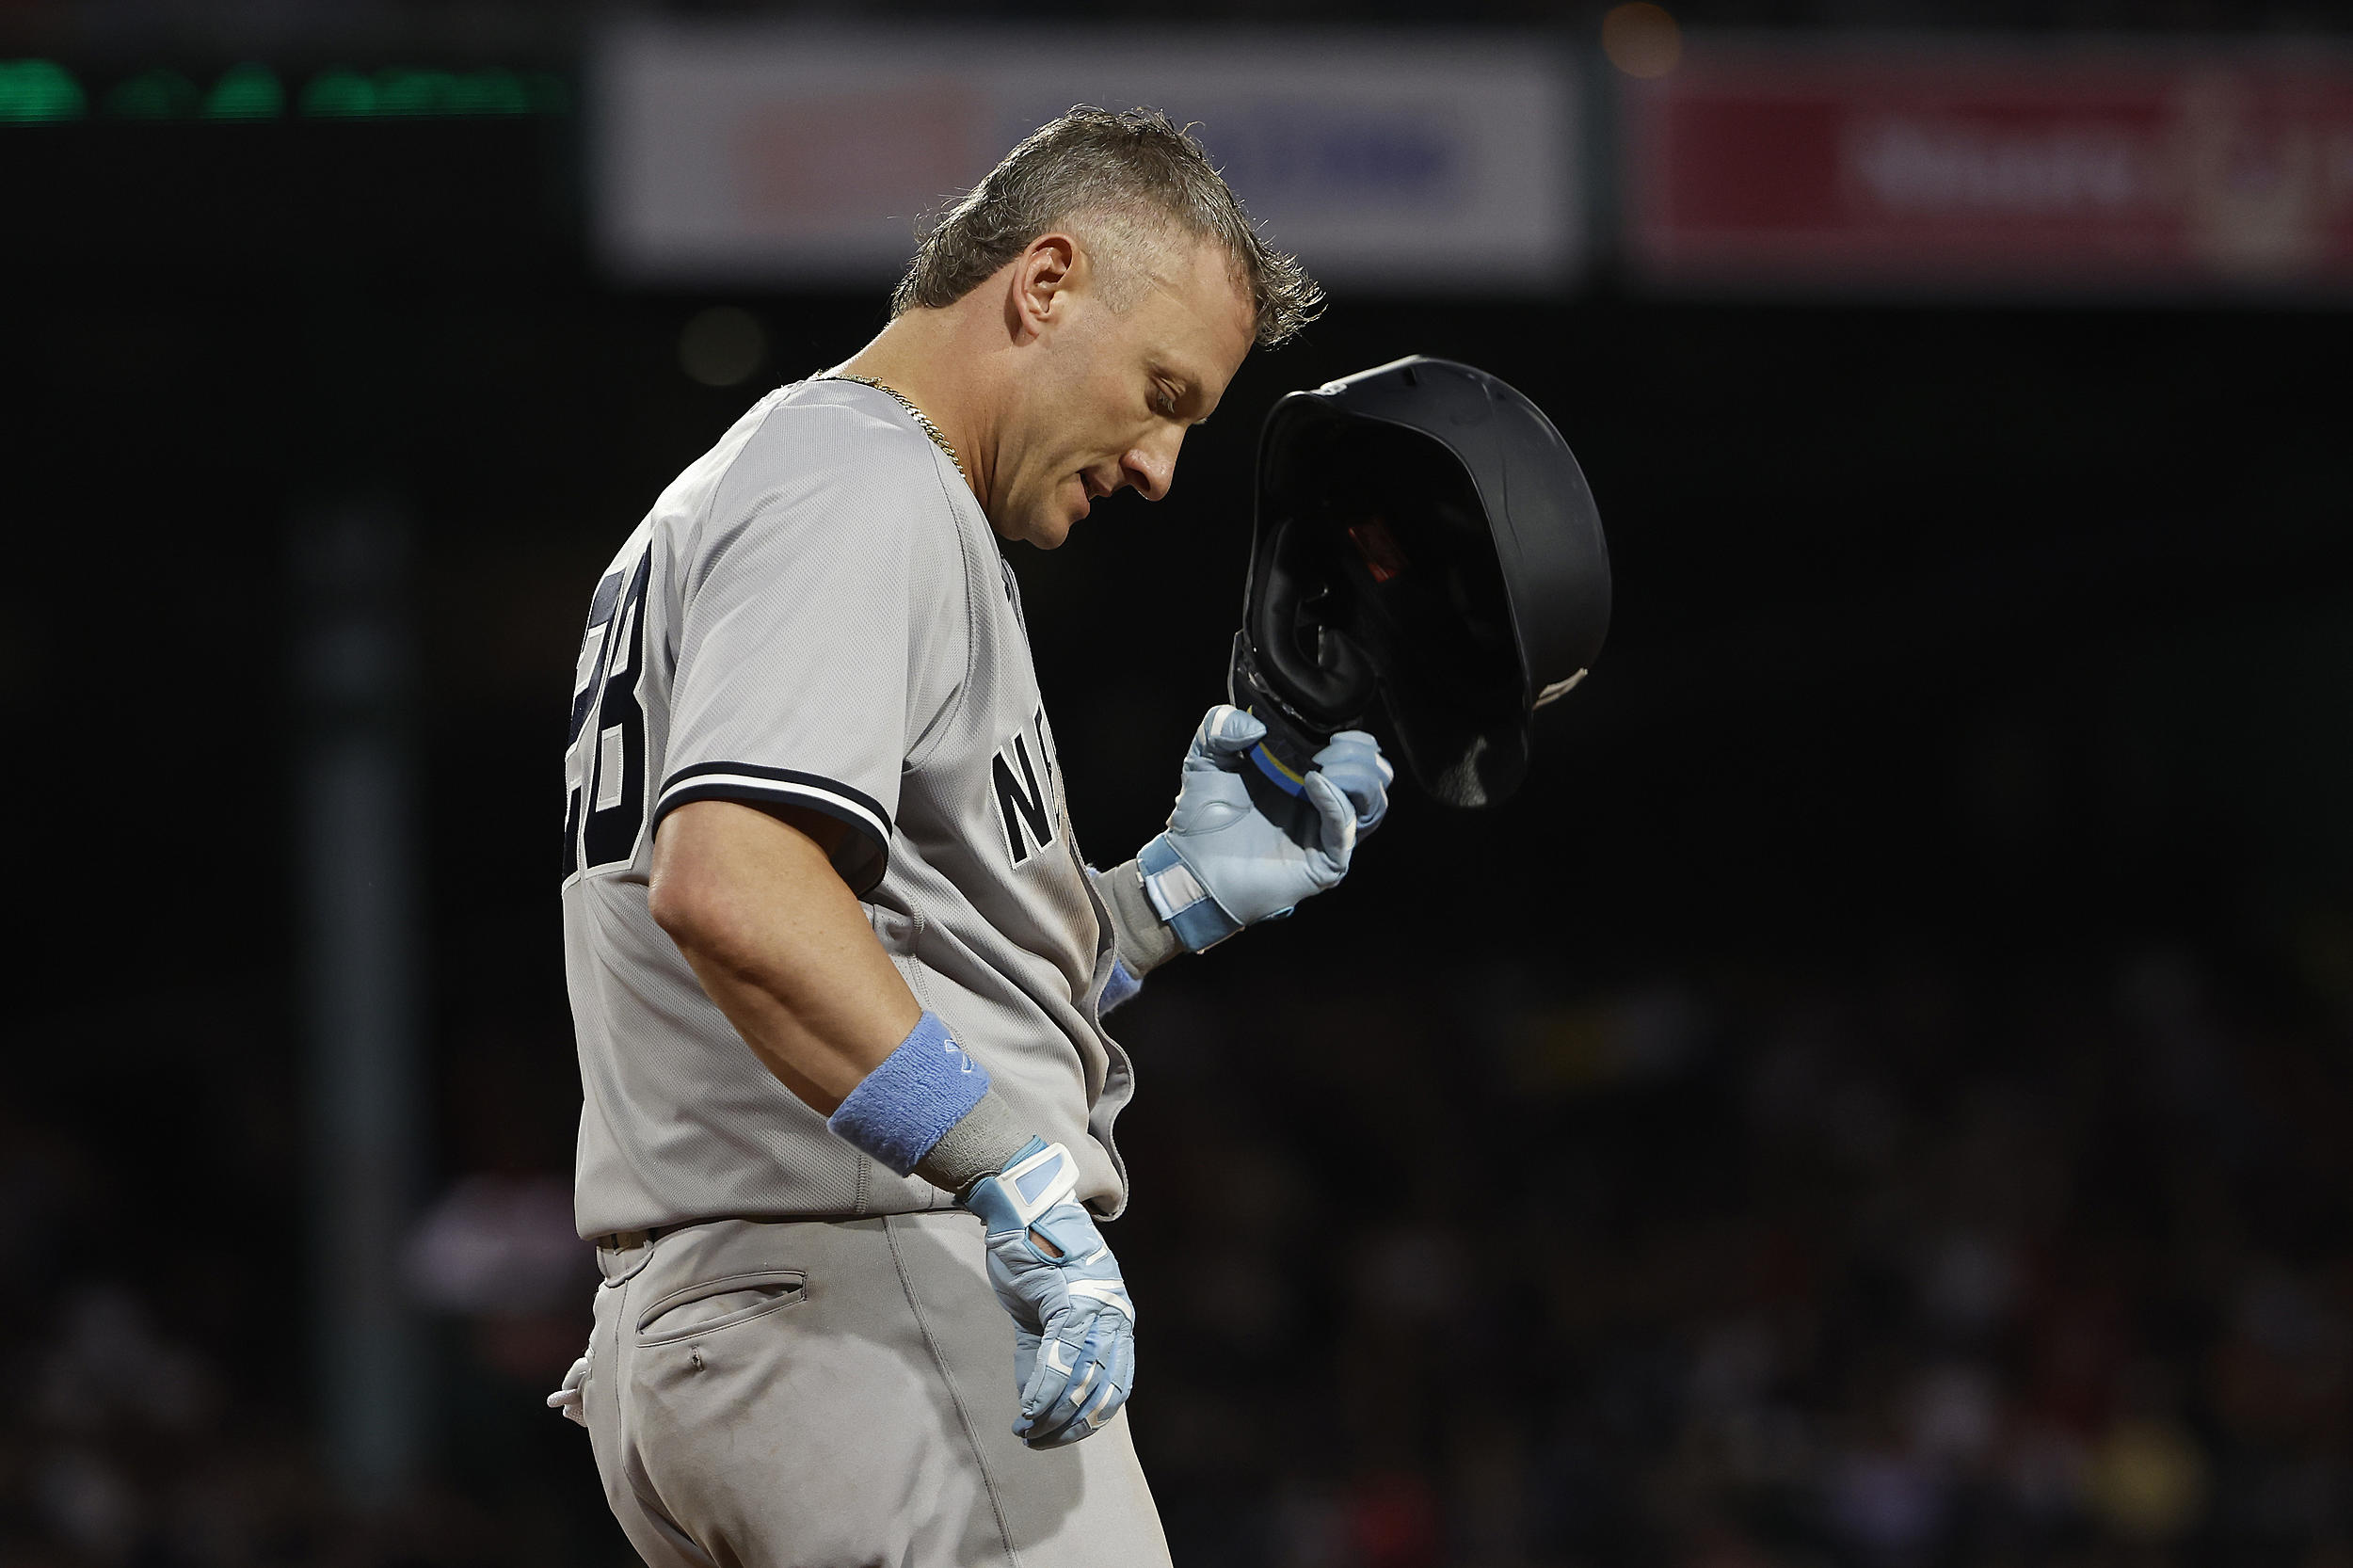 Yankees' Josh Donaldson likely headed for the injured list - Newsday